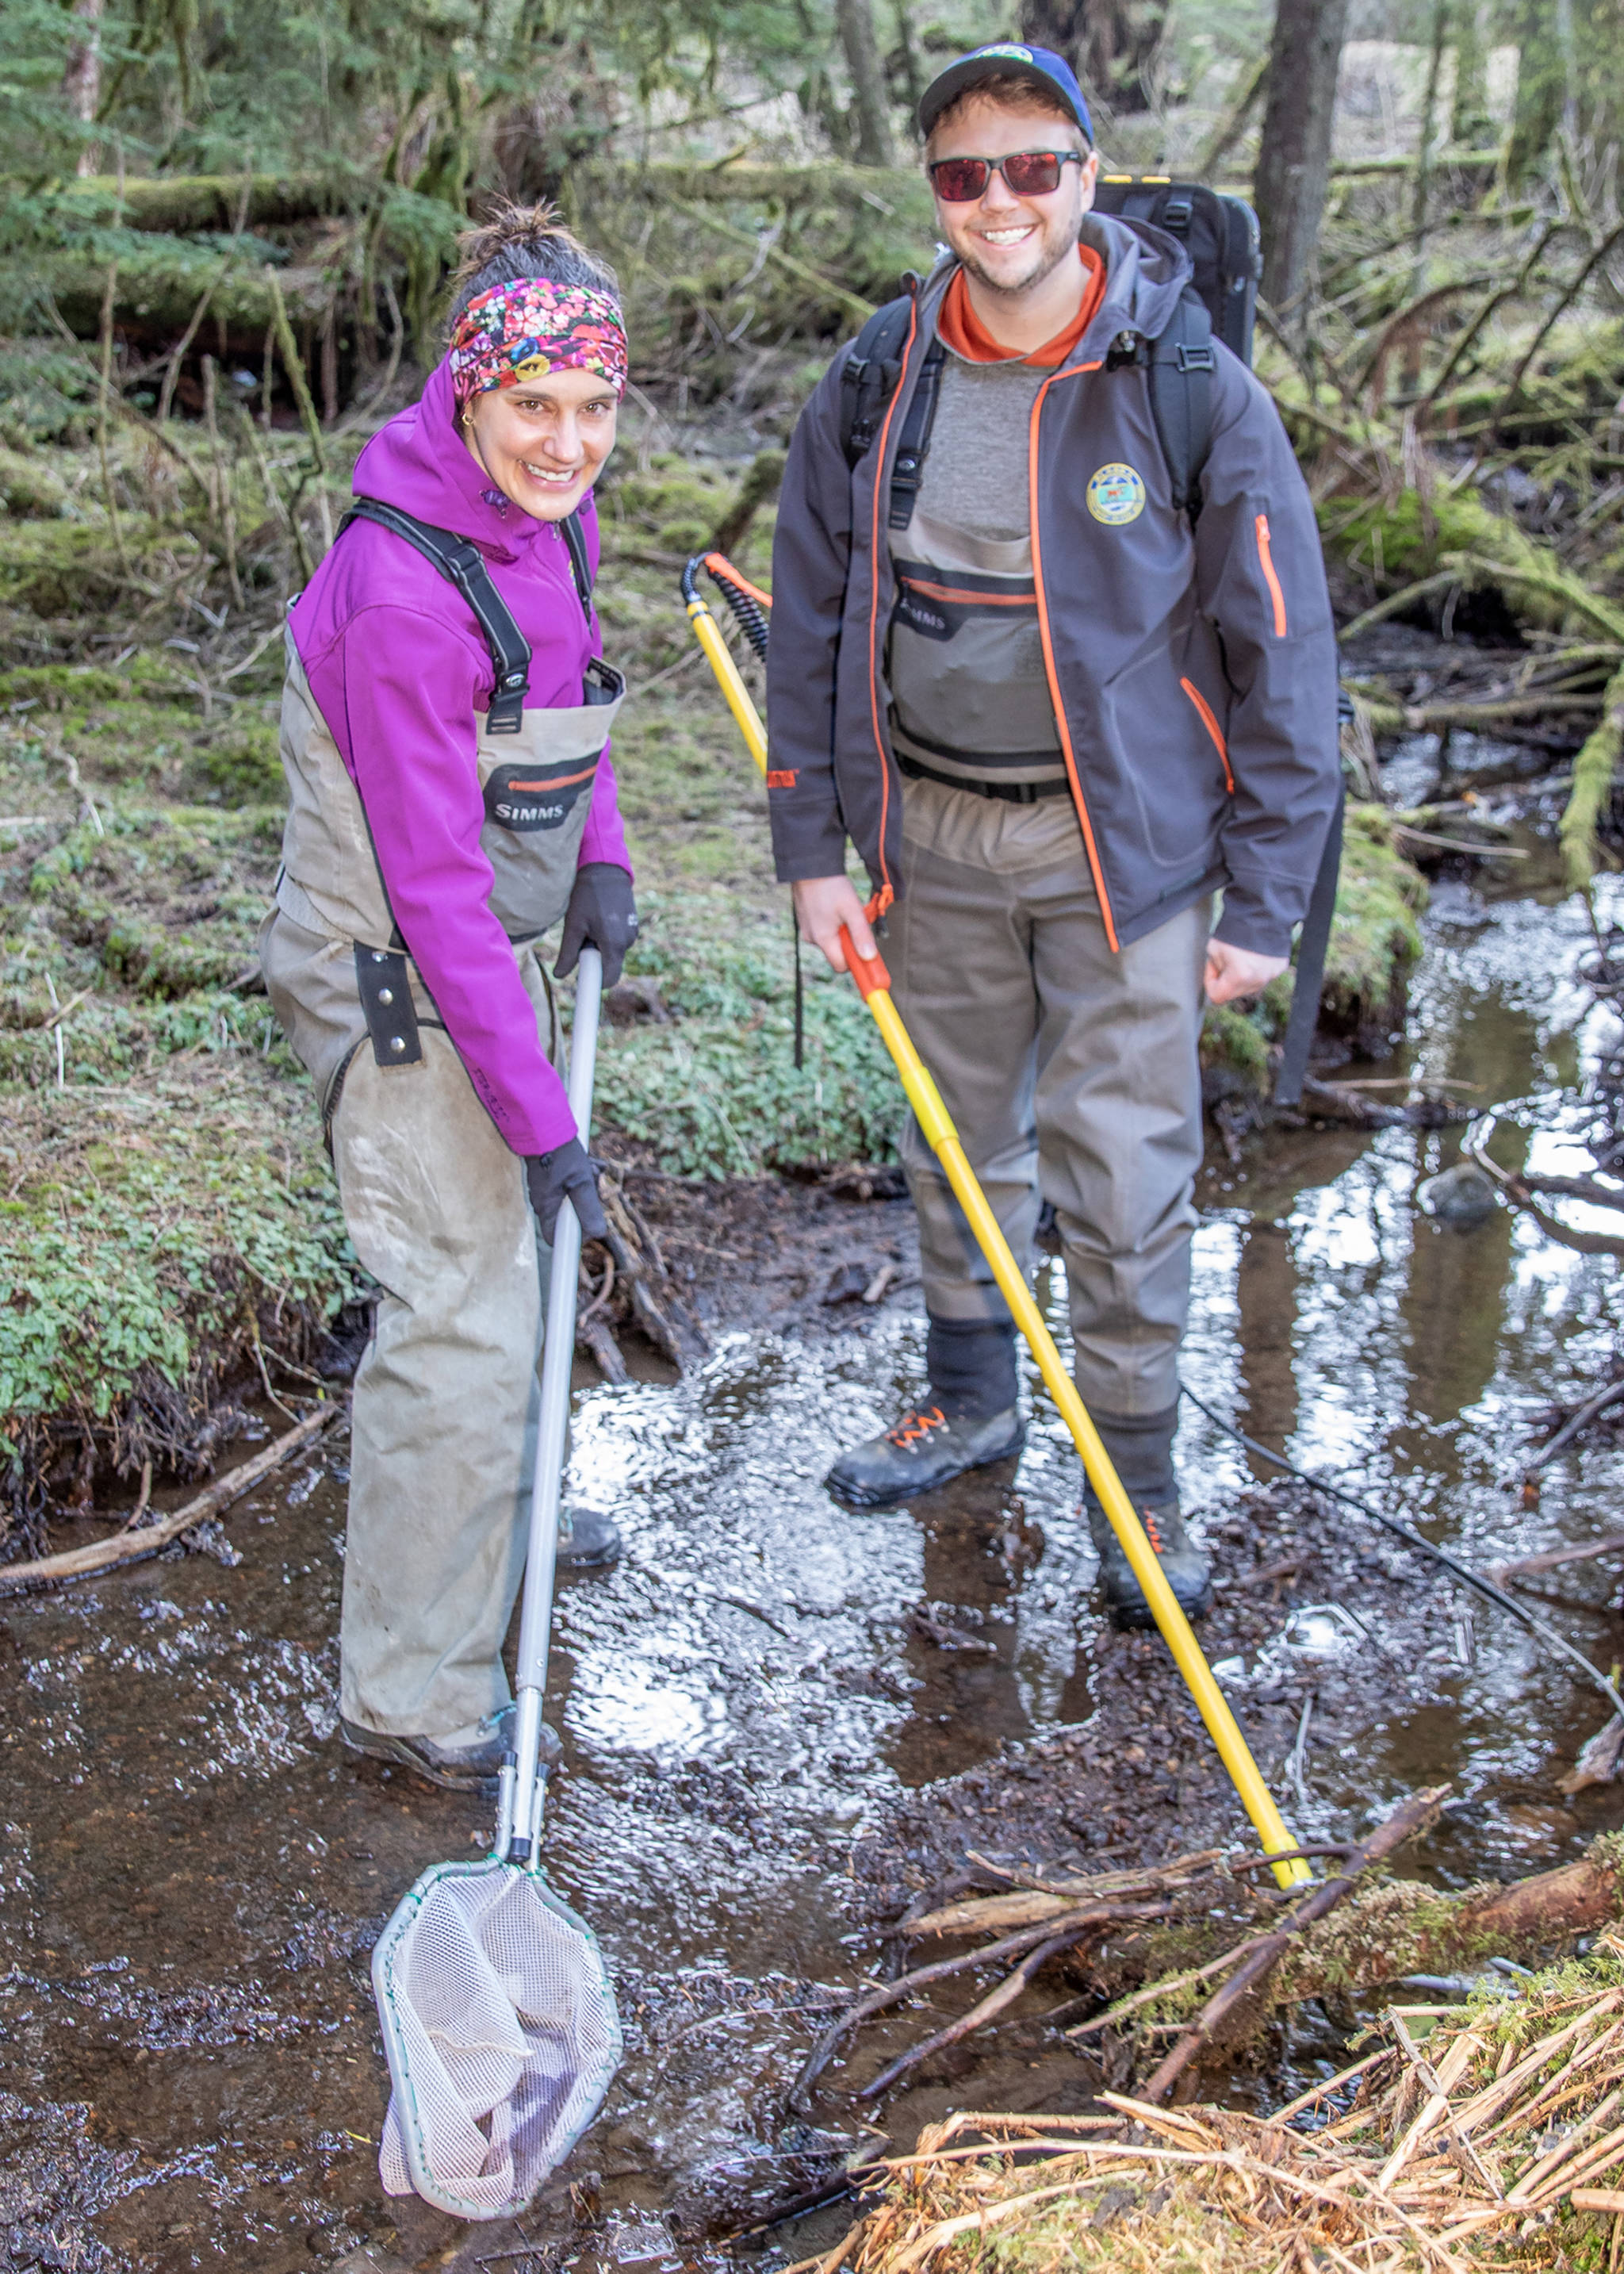 April 21, 2019: Even on a field work day, Nicole Legere and Dylan Krull, Habitat Biologists with the Alaska Department of Fish and Game manage to look sharp and well-dressed for the task. This day they were electrofishing a small tributary to Auke Lake looking for coho salmon. Both are wearing waders and boots by Simms and ADF&G logo jackets from Drift Creek Outdoors. Their most important accessory: a Smith Root LR-24 backpack electrofisher. They found coho!